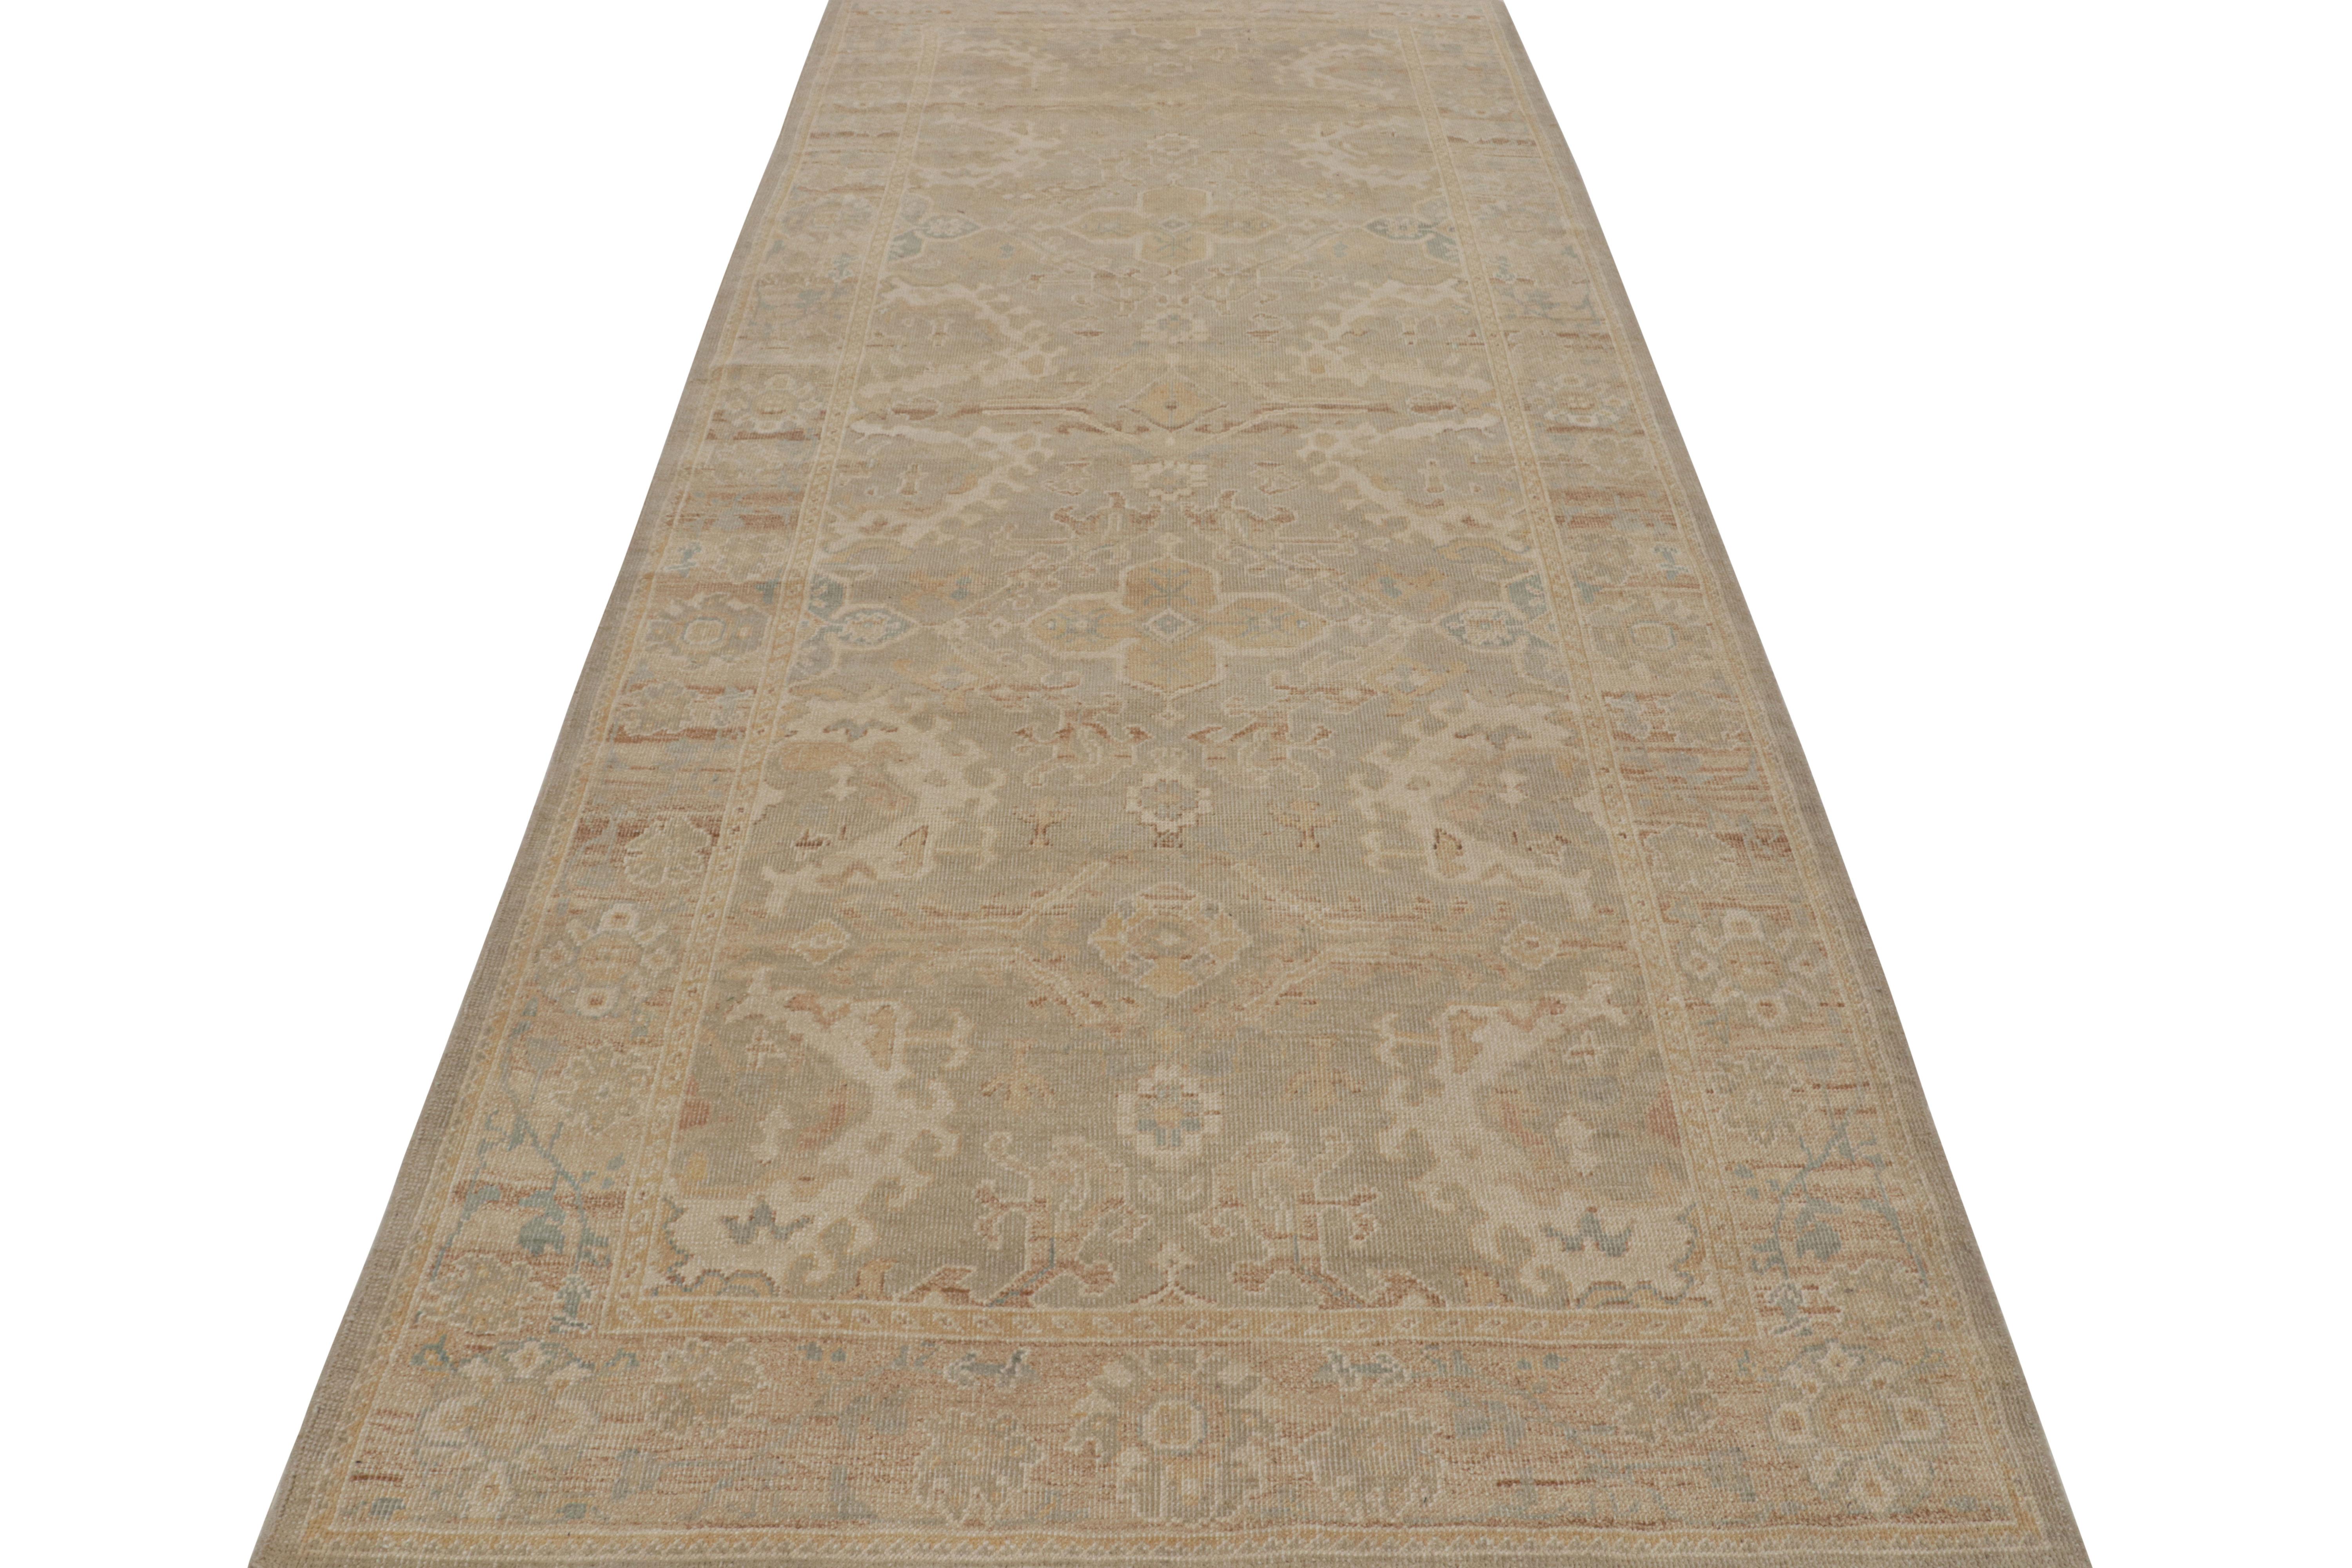 Afghan Rug & Kilim’s Khotan Style Rug in an All over Beige-Brown Floral Pattern For Sale